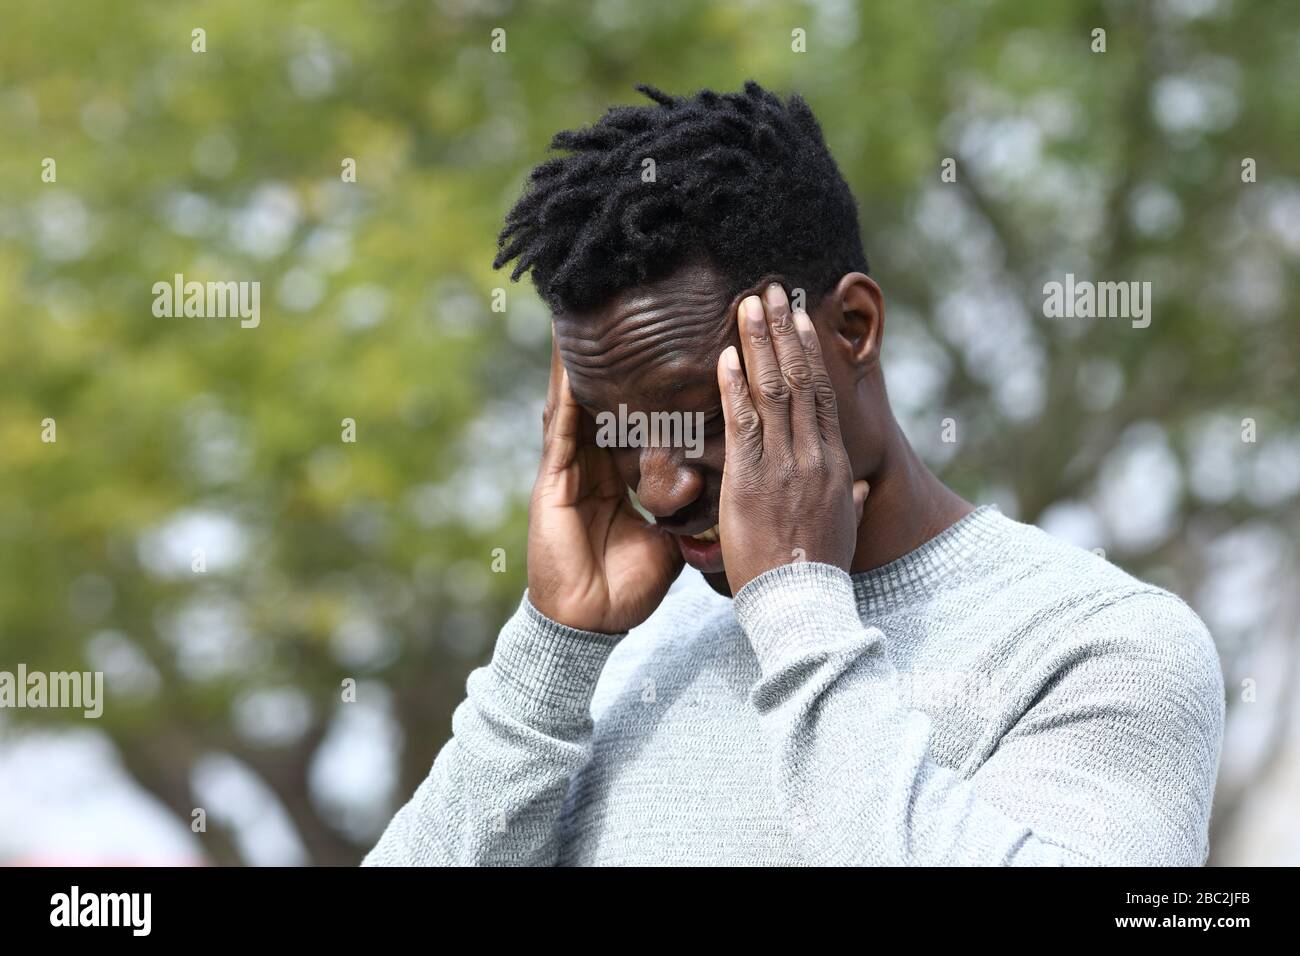 Black man suffering from severe migraine rubbing temples in a park Stock Photo